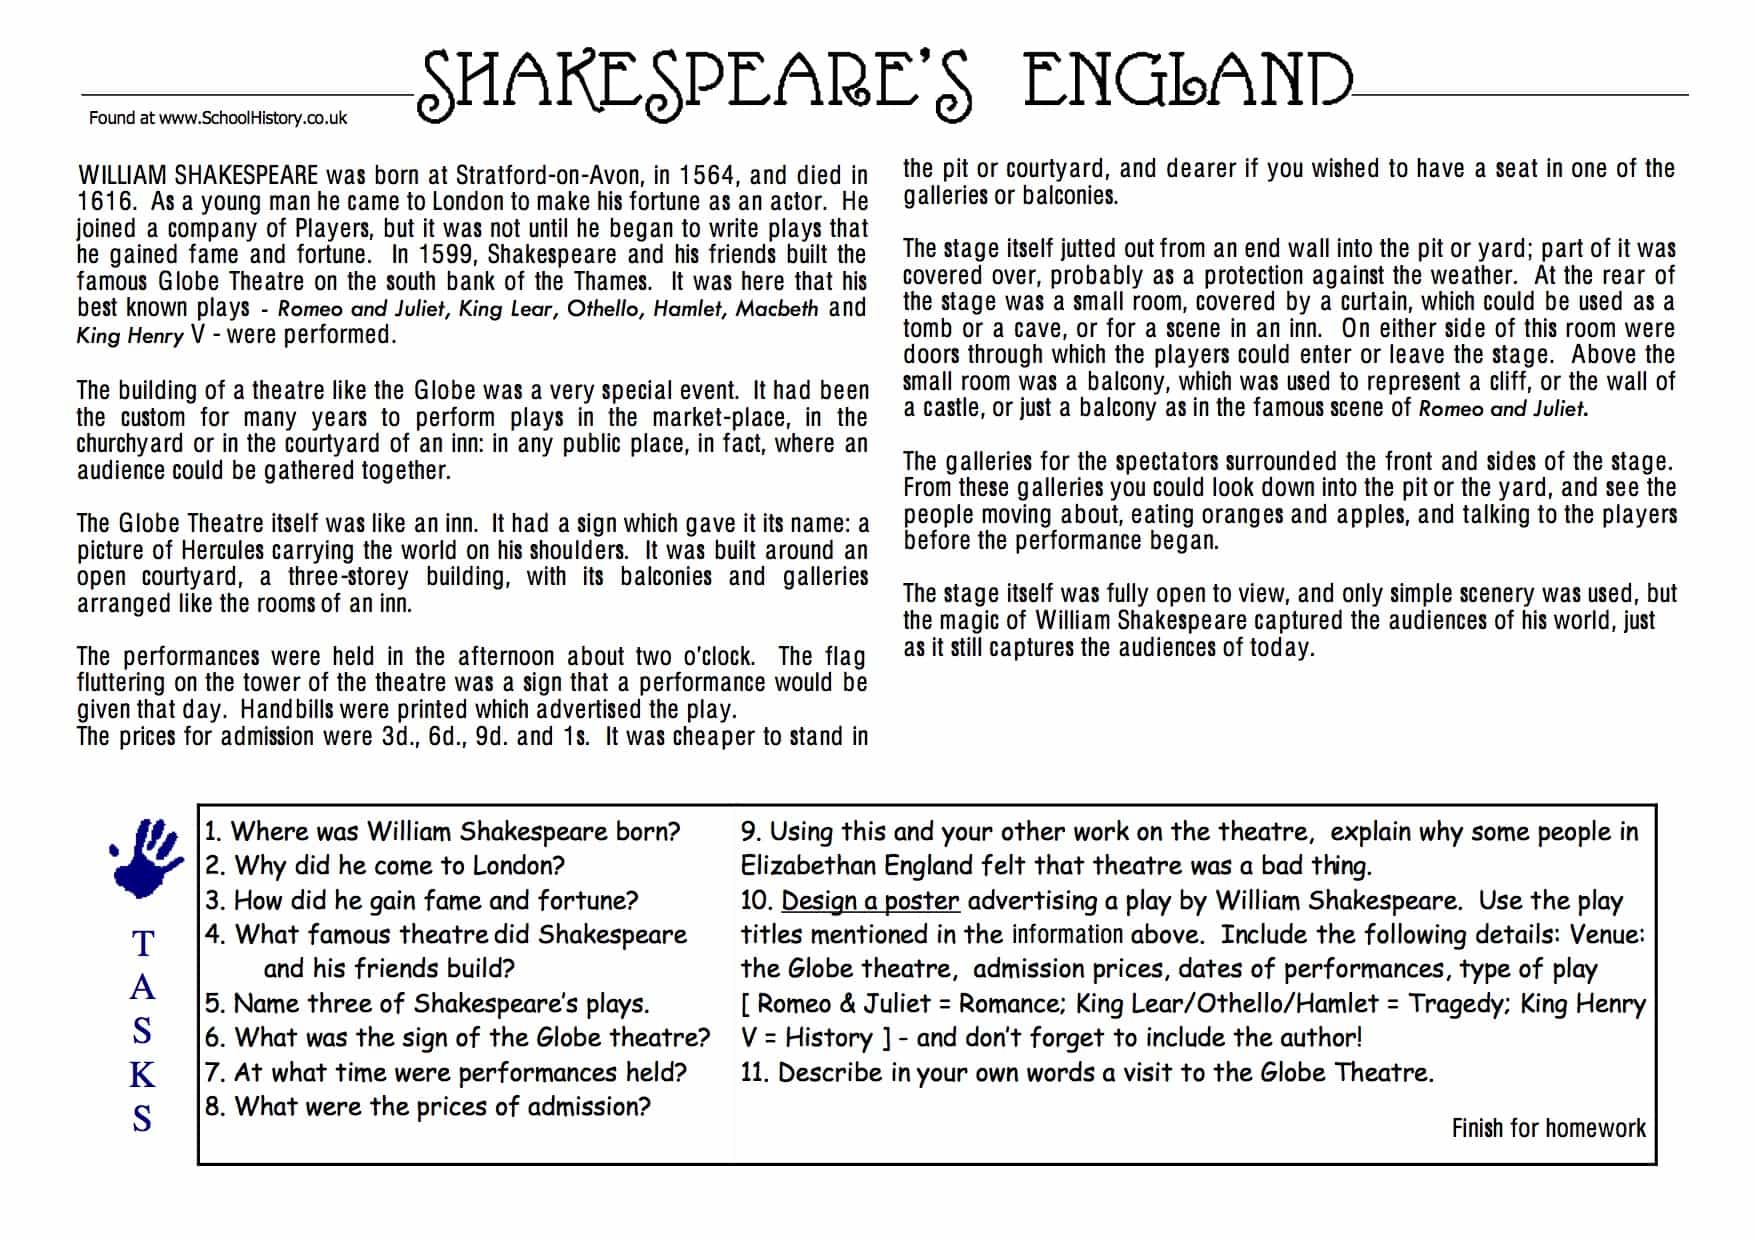 shakespeare-s-england-facts-information-pdf-study-worksheet